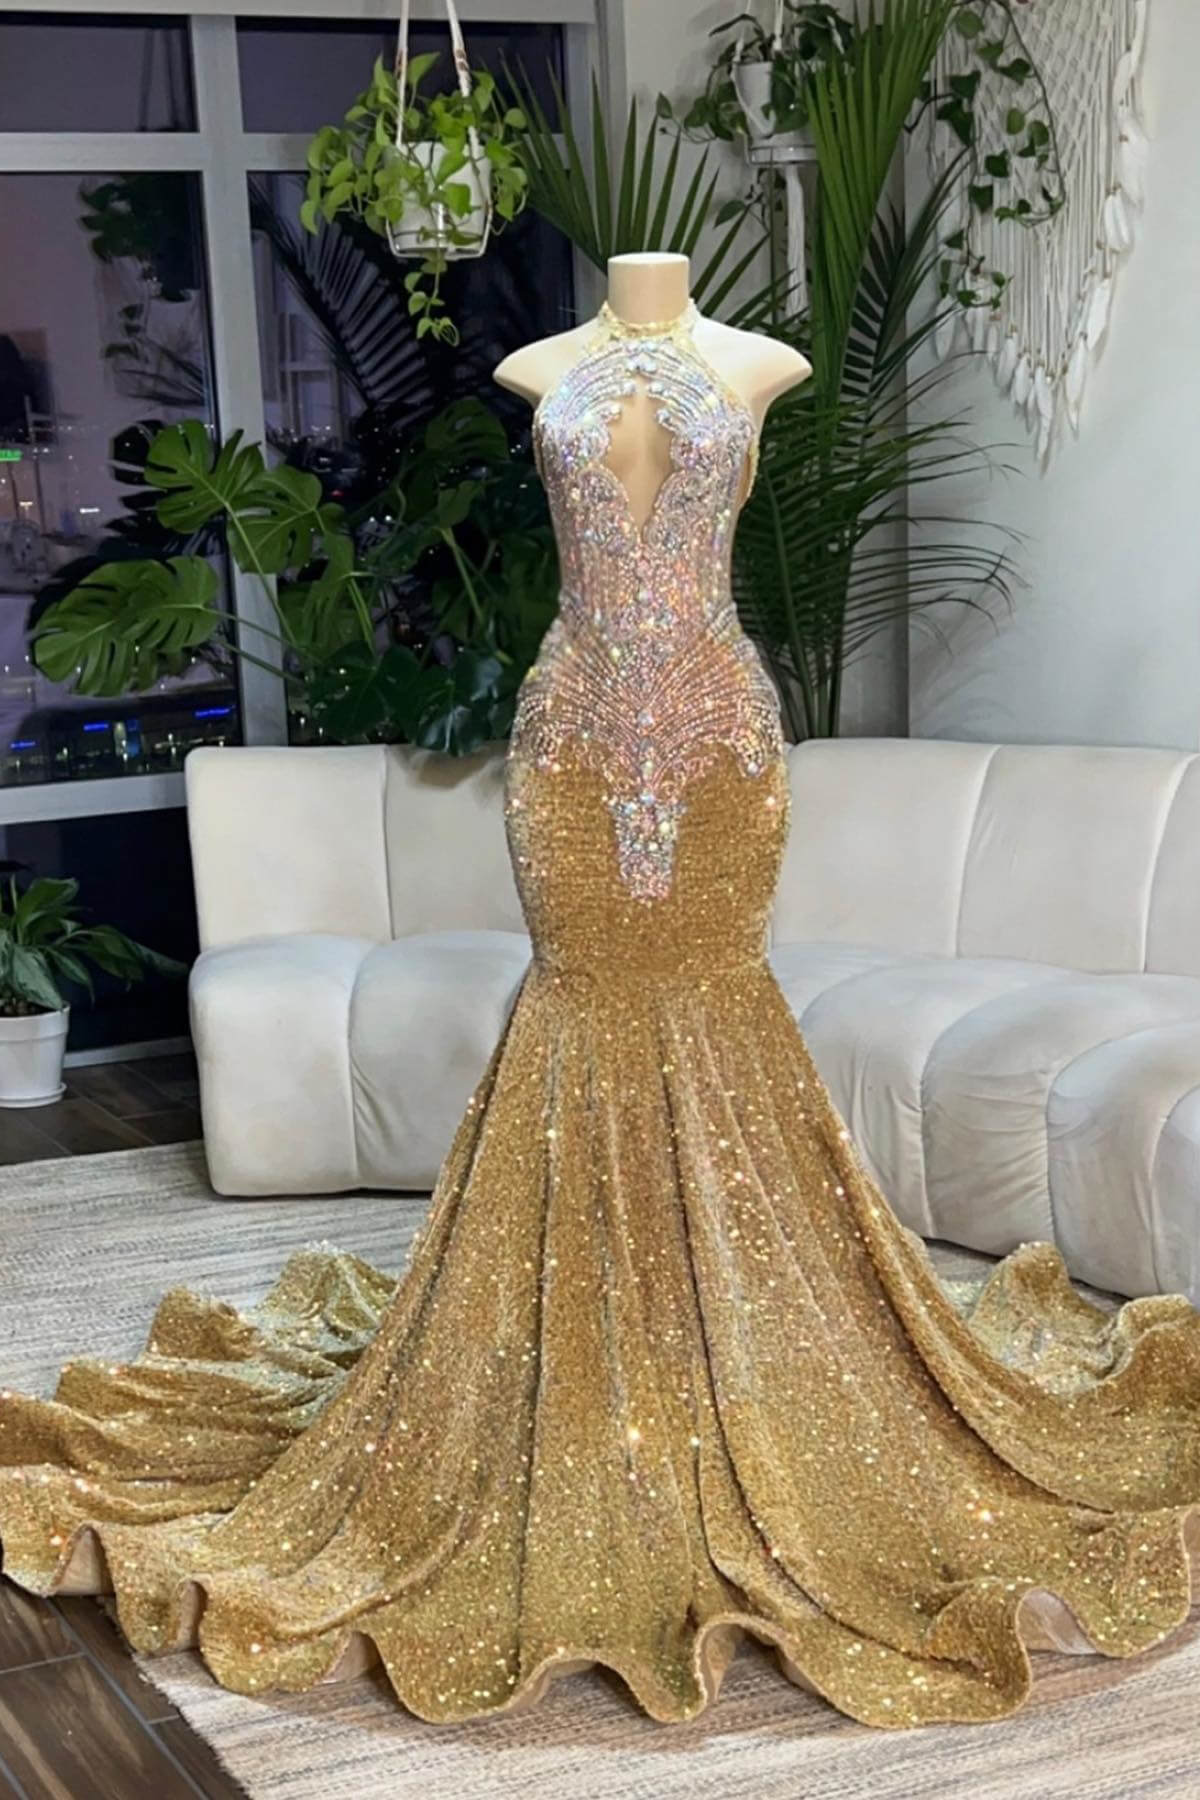 Glamorous Gold Halter Sleeveless Mermaid Formal Dresses With Sequins Beadings Crystals Long - lulusllly